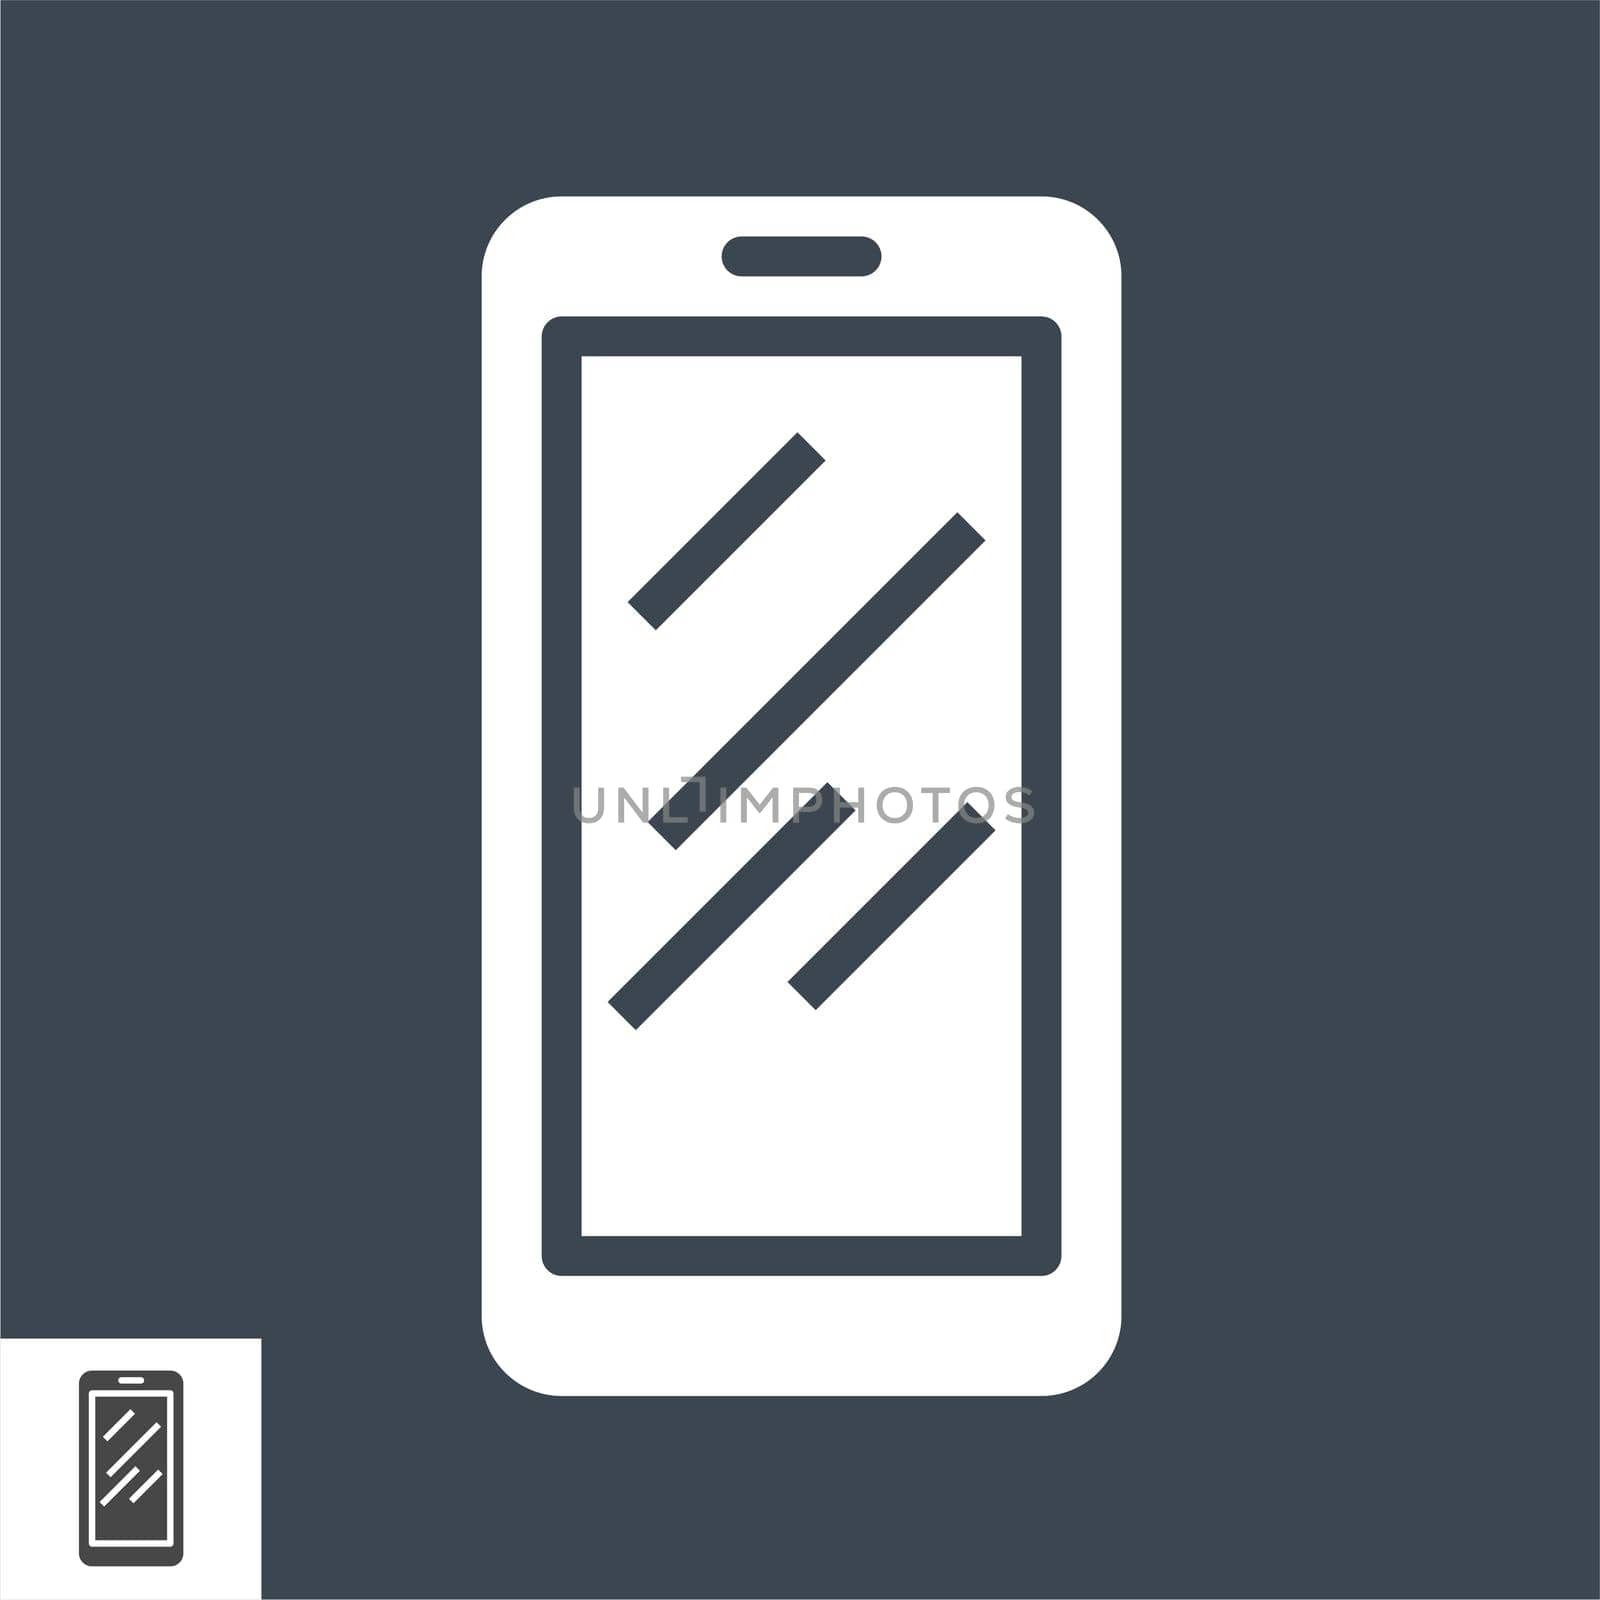 Smartphone Flat Vector Icon. Flat icon isolated on the black background. Editable EPS file. Vector illustration.